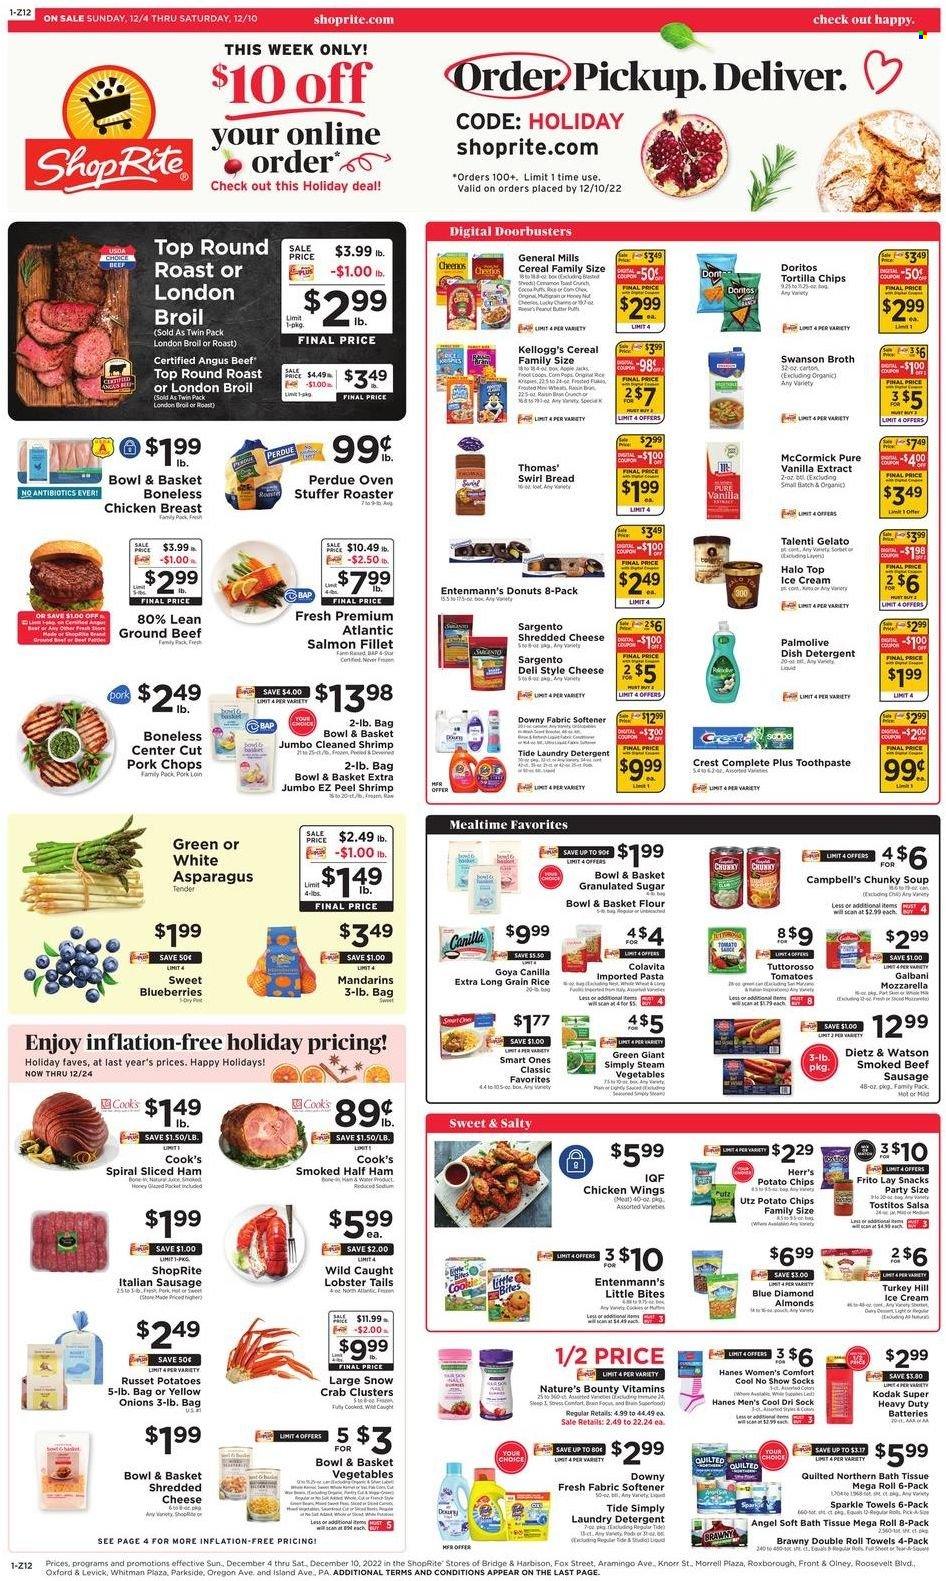 thumbnail - ShopRite Flyer - 12/04/2022 - 12/10/2022 - Sales products - bread, Bowl & Basket, Ace, donut, Entenmann's, asparagus, russet potatoes, tomatoes, blueberries, mandarines, lobster, salmon, salmon fillet, crab, lobster tail, shrimps, Campbell's, soup, pasta, Knorr, Perdue®, half ham, ham, Dietz & Watson, sausage, italian sausage, mozzarella, shredded cheese, Sargento, ice cream, Talenti Gelato, gelato, chicken wings, snack, Kellogg's, Little Bites, Doritos, tortilla chips, potato chips, chips, Tostitos, granulated sugar, sugar, broth, vanilla extract, Goya, cereals, Cheerios, rice, long grain rice, salsa, peanut butter, almonds, Blue Diamond, rum, beef meat, ground beef, round roast, pork chops, pork loin, pork meat, bath tissue, Quilted Northern, paper towels, detergent, Tide, fabric softener, laundry detergent, Downy Laundry, dishwasher cleaner, Palmolive, toothpaste, Crest, battery, socks, no-show socks, Nature's Bounty. Page 1.